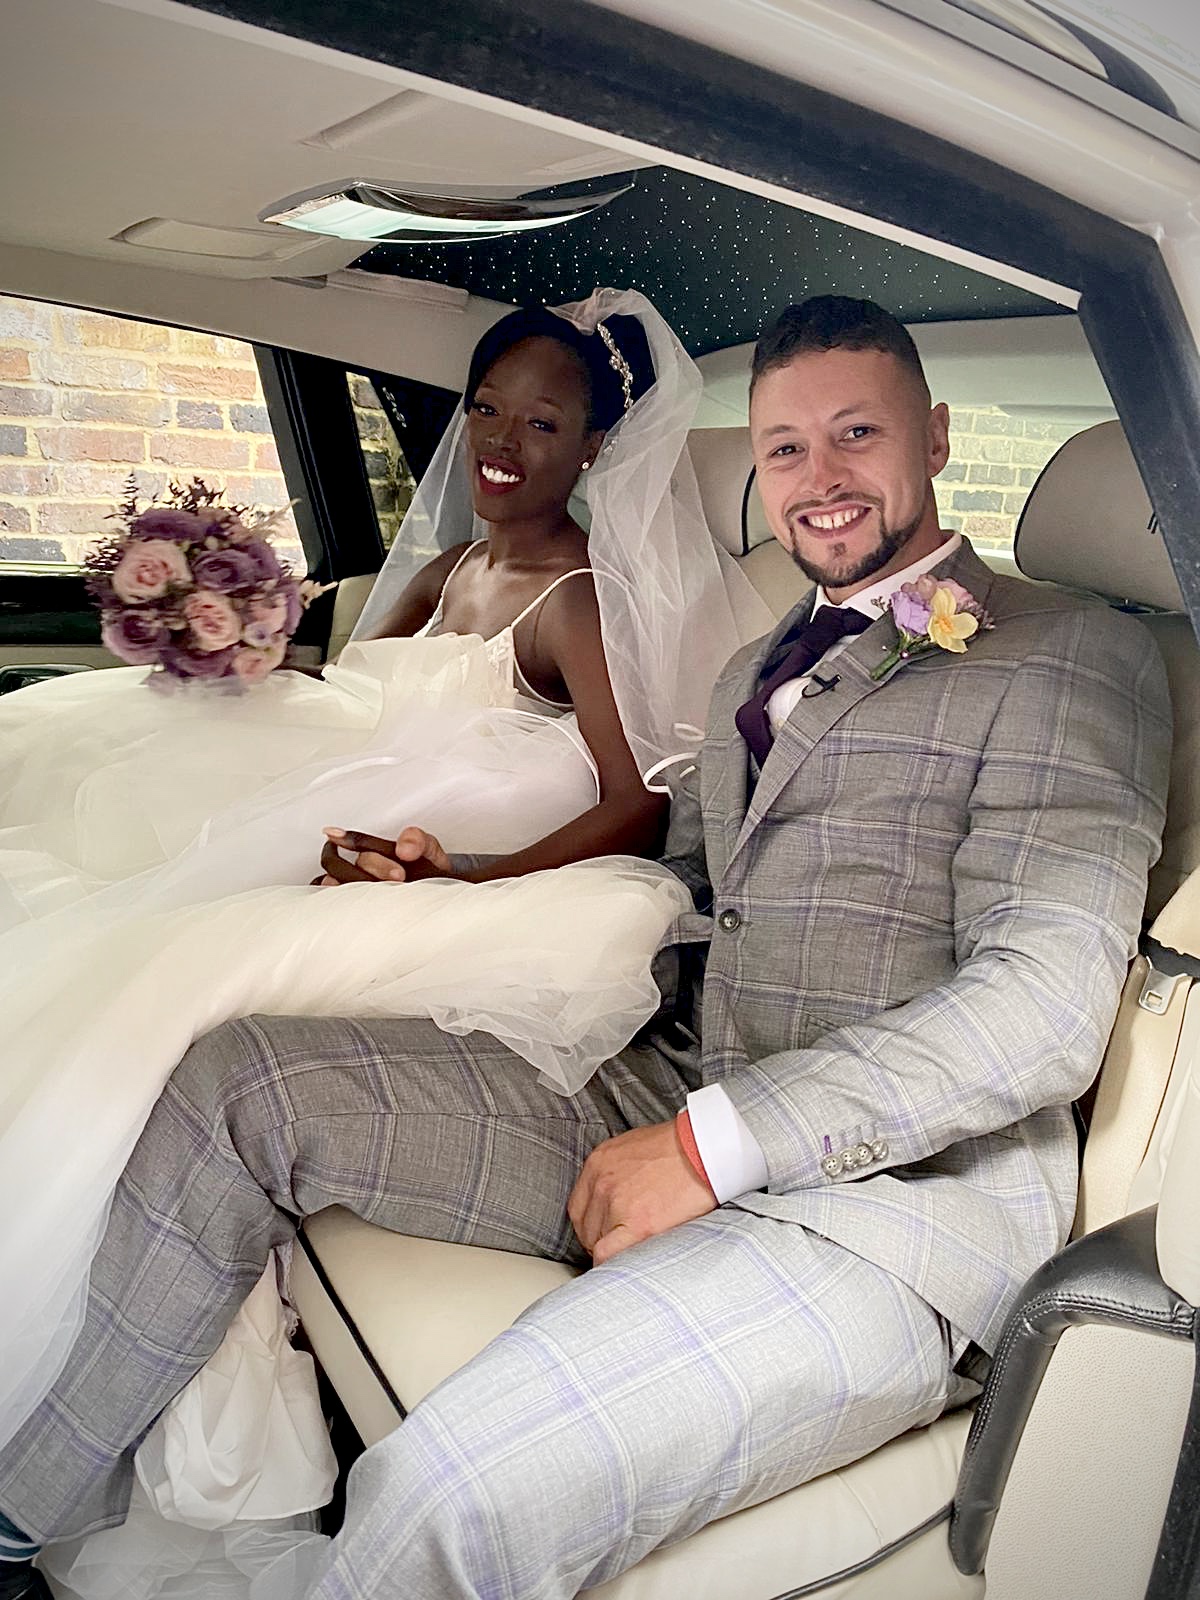 Yolanda and Chris got married the day before she entered the Channel 4 reality series